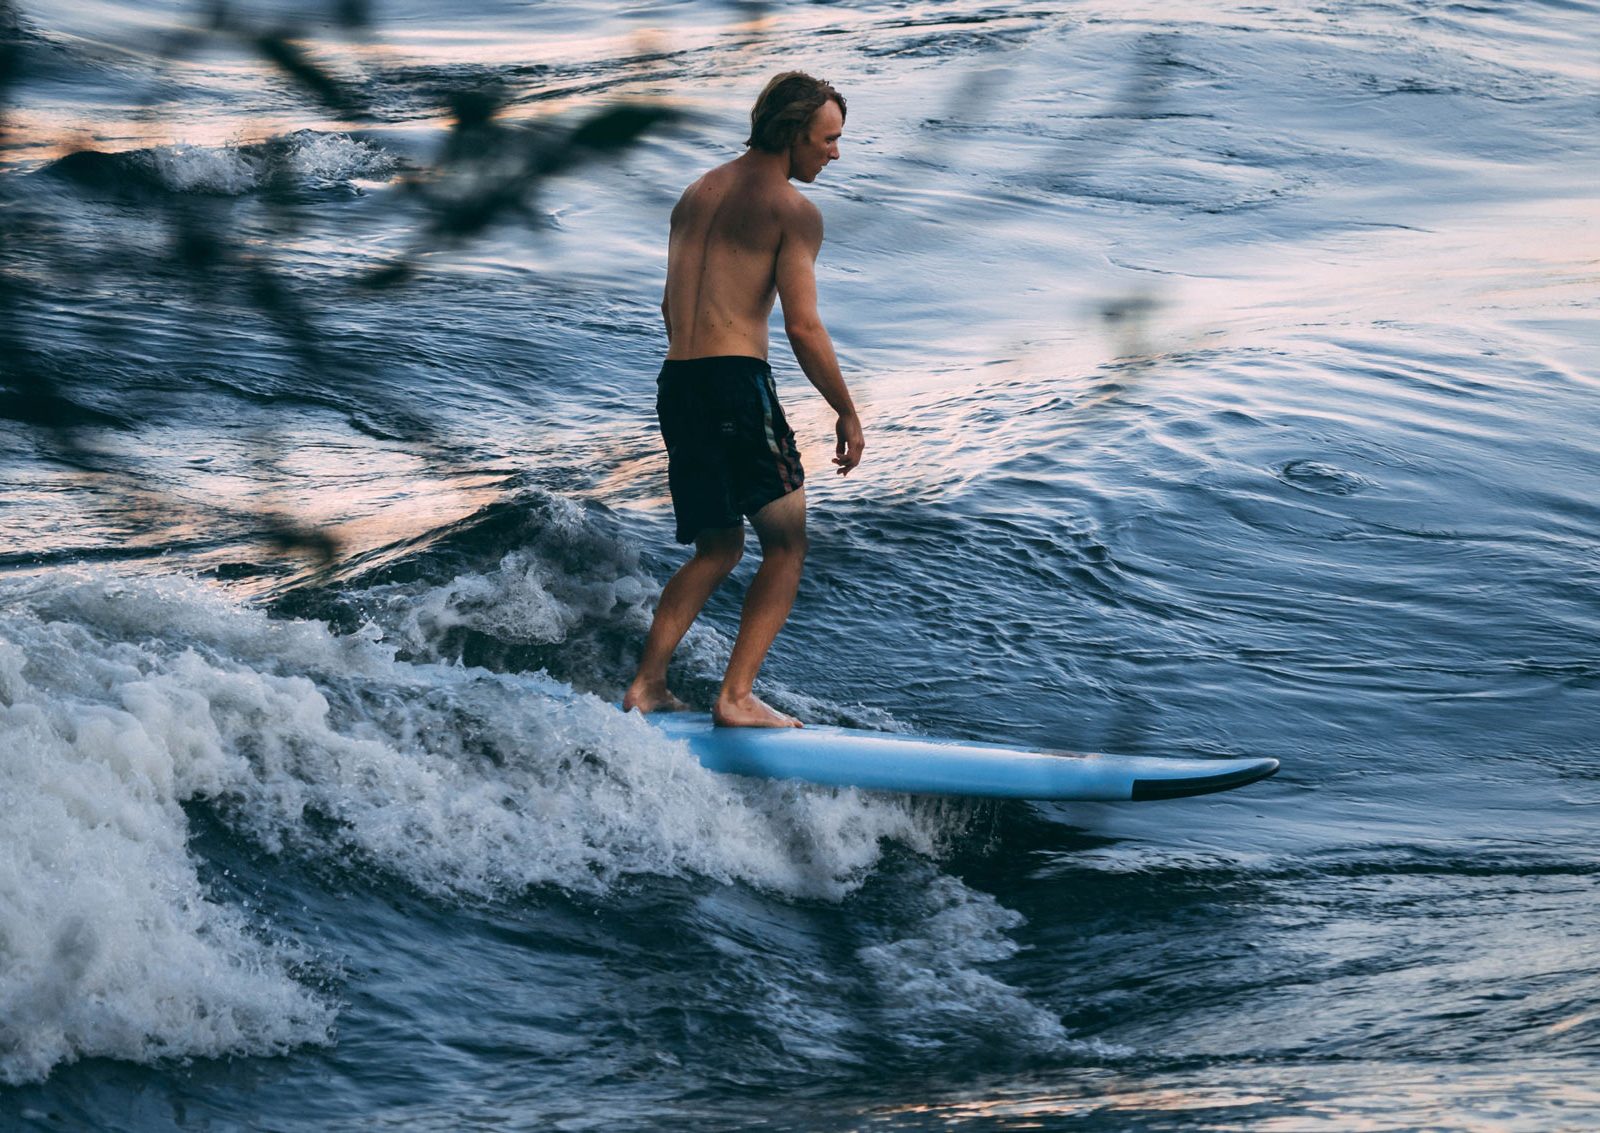 Surfing Vague a Guy